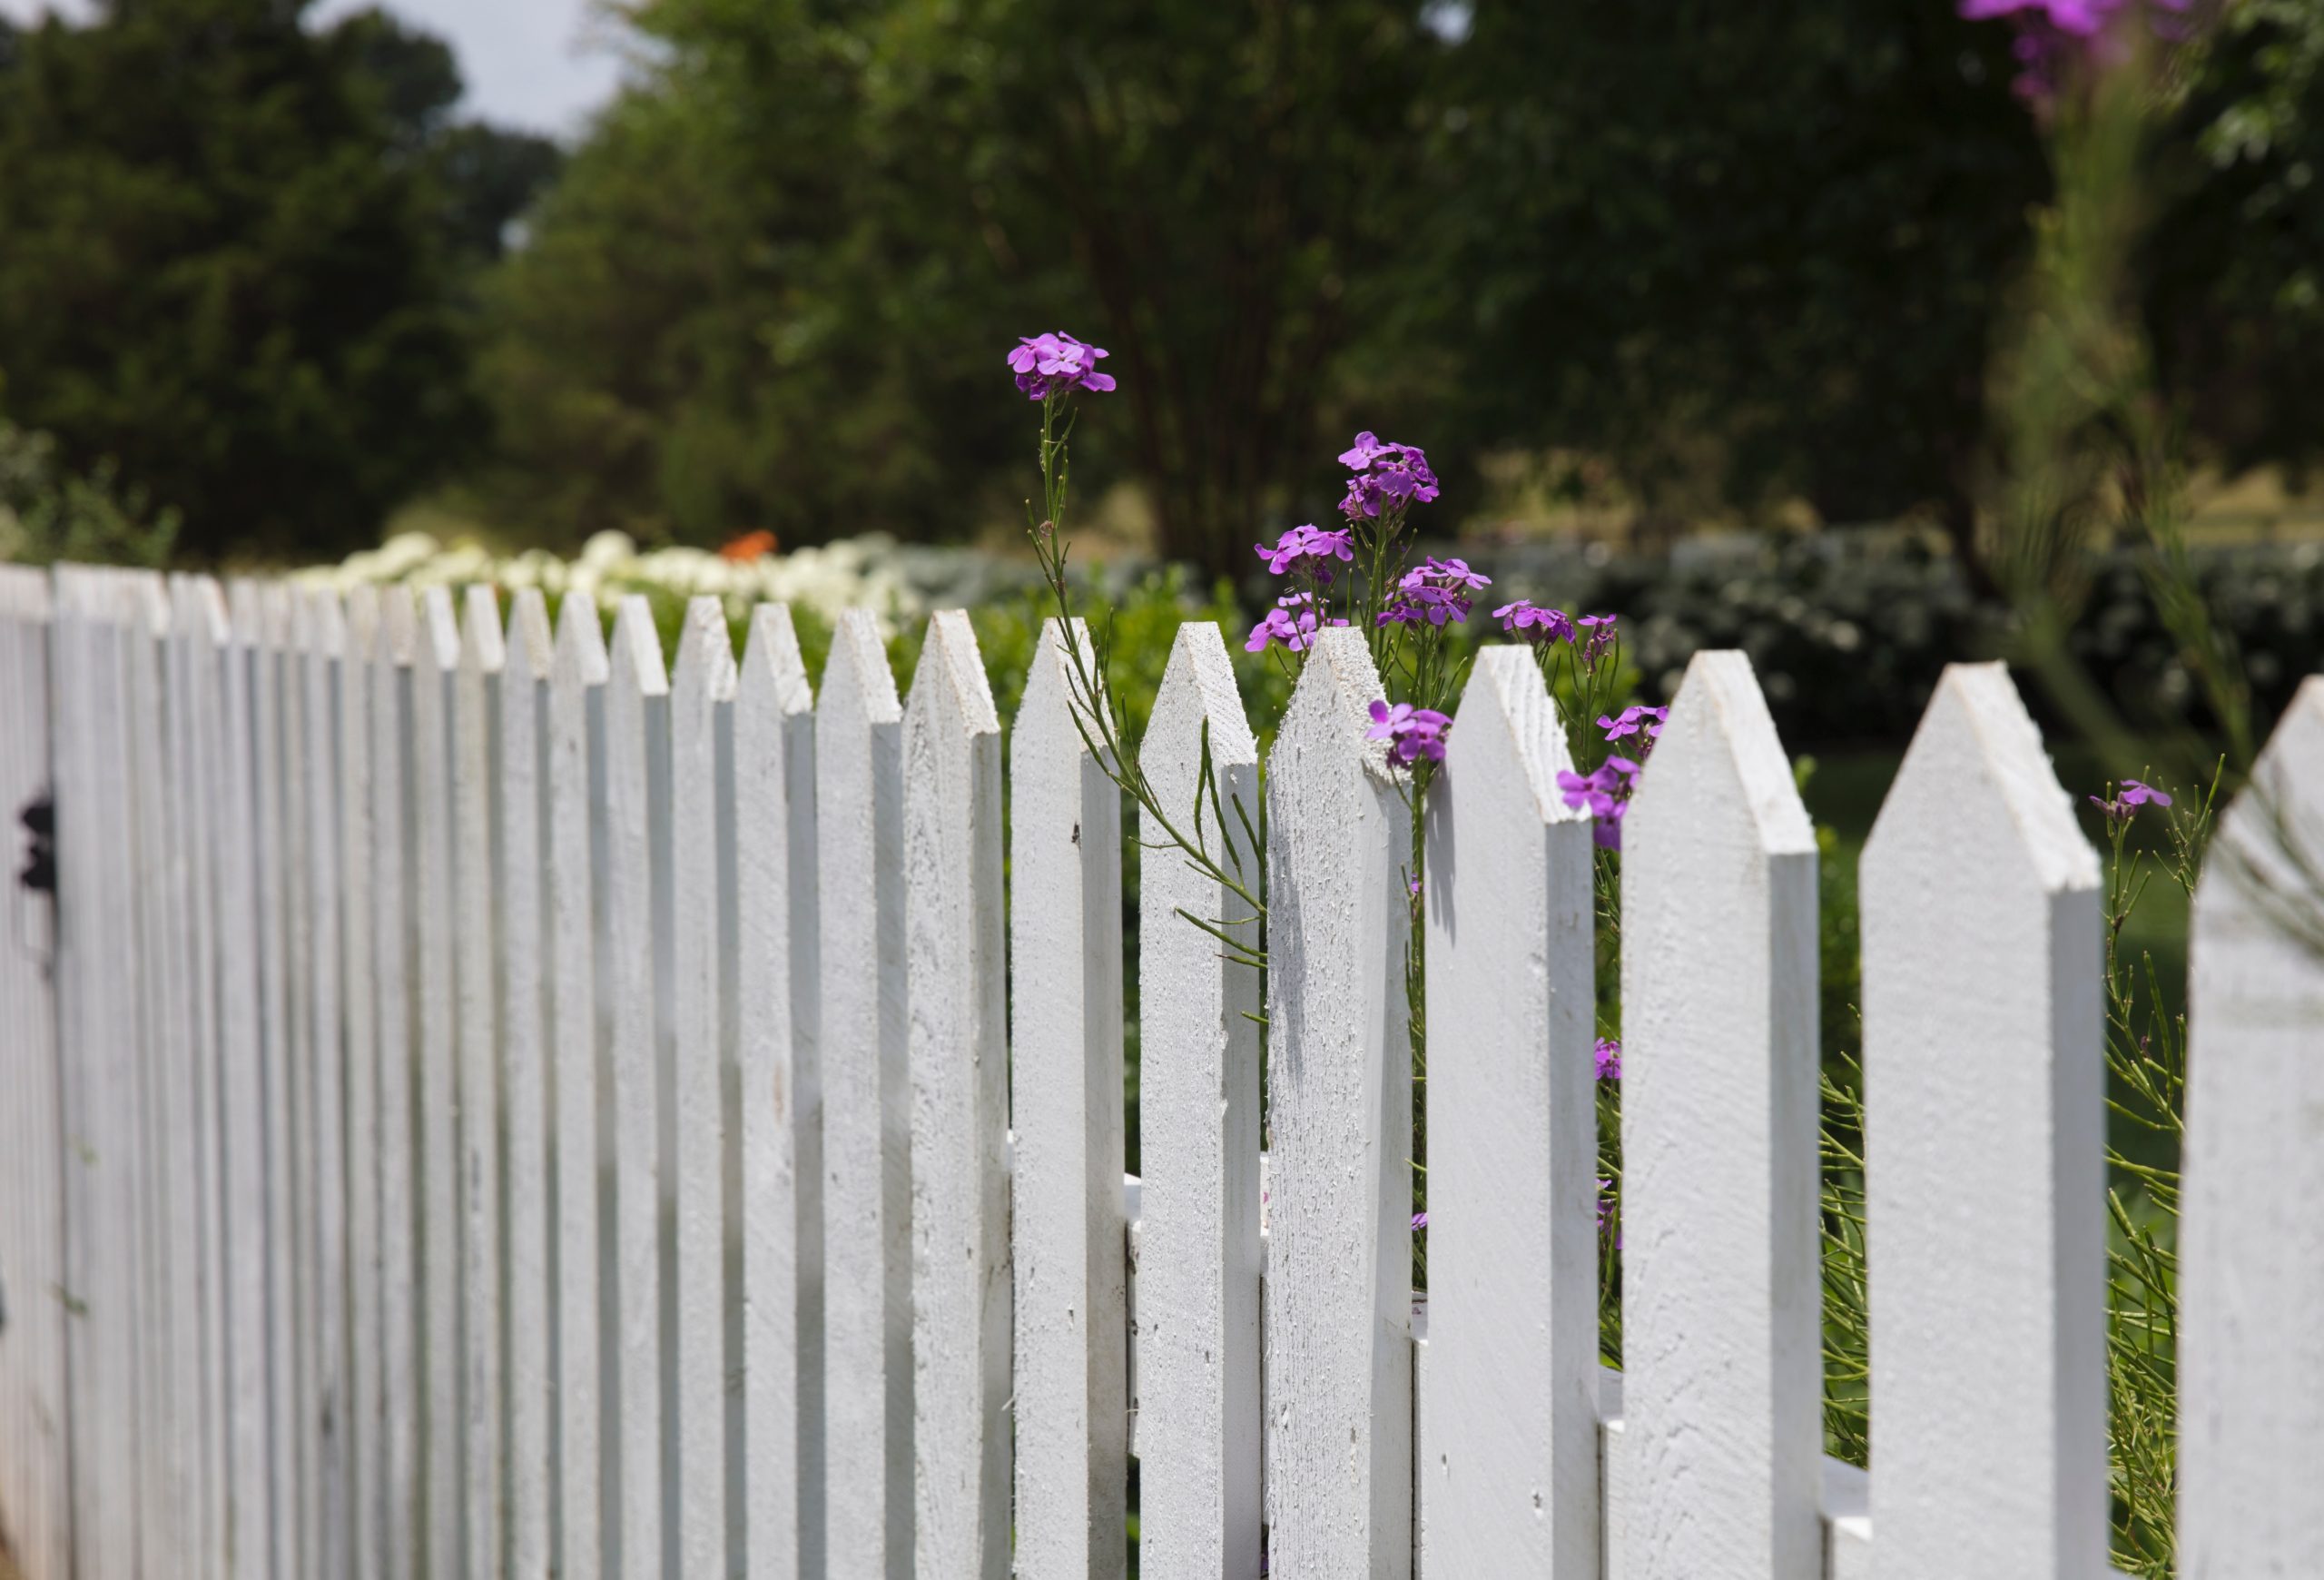 How To Take Down & Dispose Of Fencing